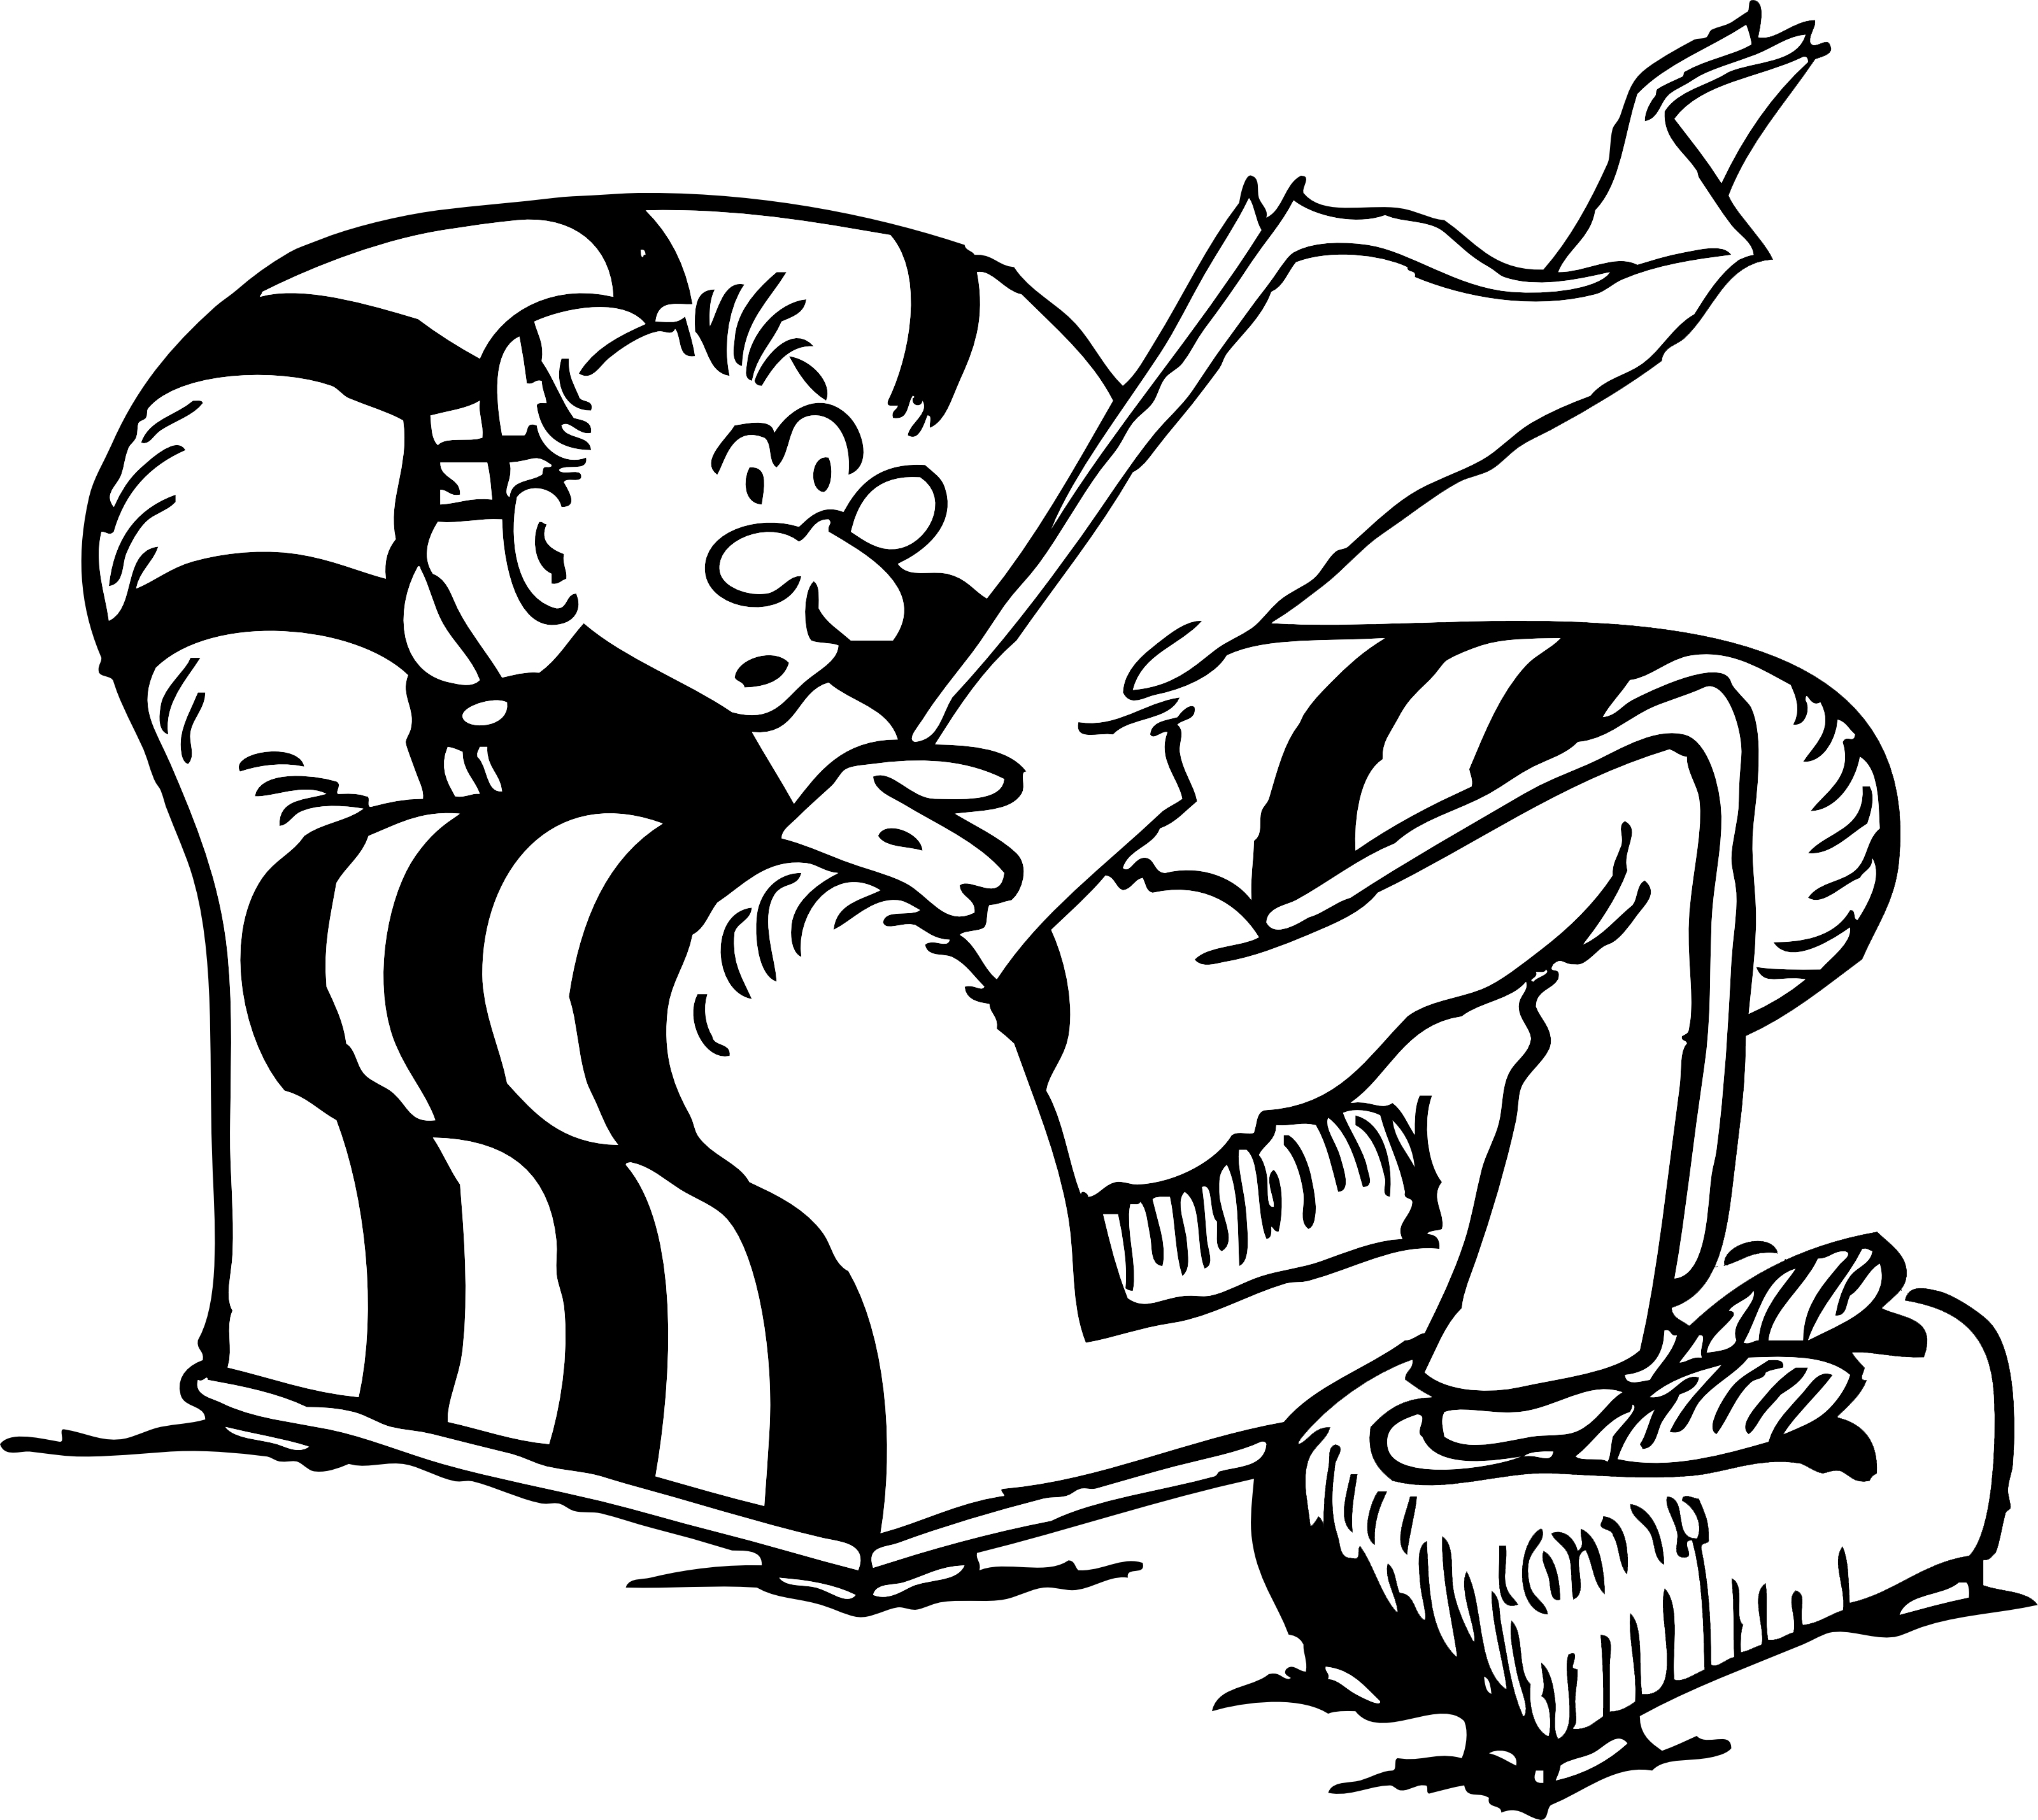 Free Retro Clipart Illustration Of A Man Sitting On Chair While Reading Daily Newspaper